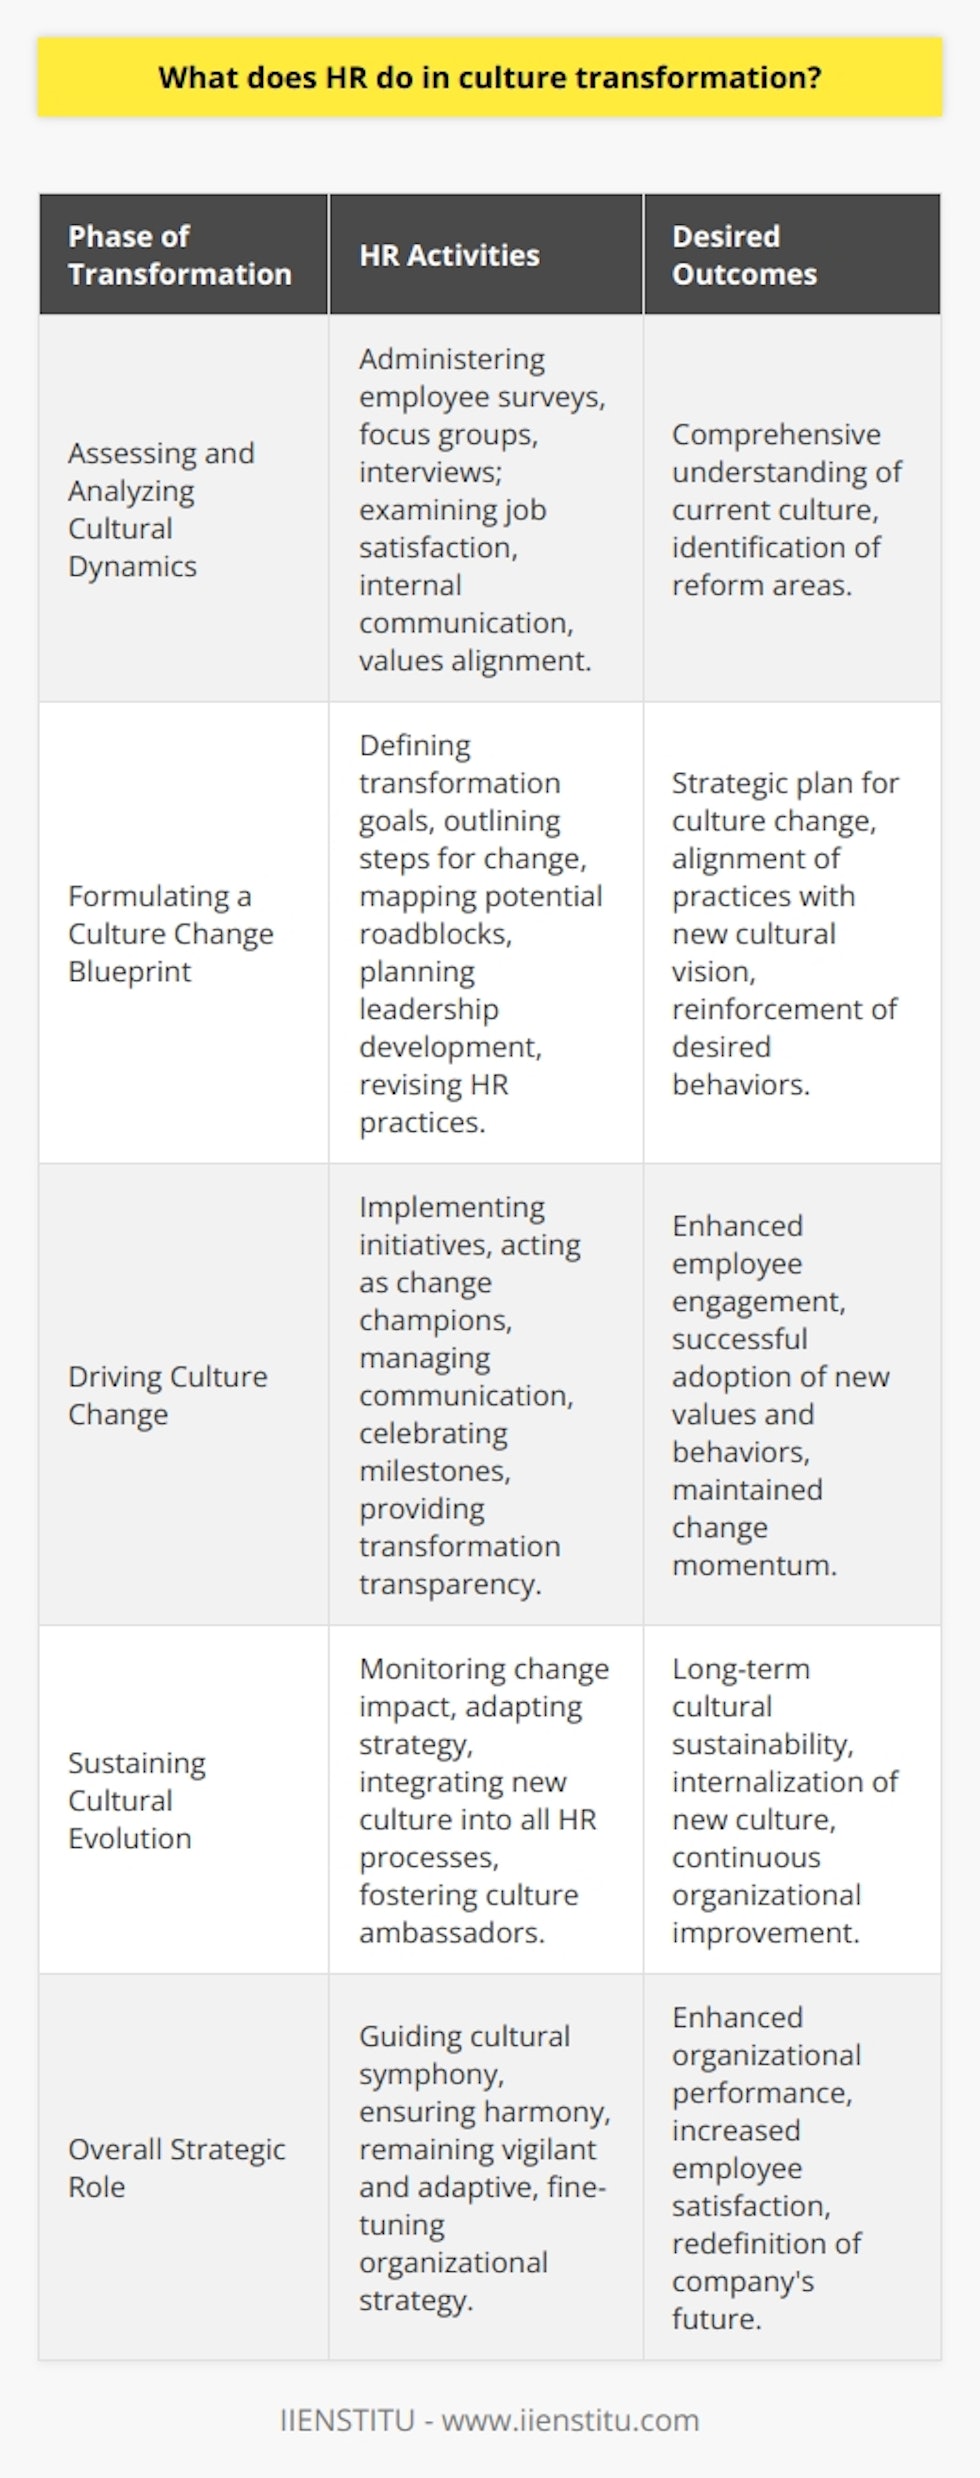 Culture transformation within organizations is a vital process that shapes the way employees interact, make decisions, and ultimately determine the success of the company. HR's involvement in this transformative process is multifaceted and requires a strategic approach to initiating and embedding lasting change.Assessing and Analyzing Cultural DynamicsHR takes on the investigative role of diagnosing the core elements that constitute the current organizational culture. This involves detailed data collection through methods such as employee surveys, focus groups, and one-on-one interviews. HR teams may explore areas like job satisfaction, internal communication effectiveness, and the alignment between individual and organizational values. By doing so, they can understand the nuances of the existing culture and identify areas that need reformation.Formulating a Culture Change BlueprintOnce the assessment phase is complete, HR must design a strategic blueprint for culture transformation. This involves defining the end goals, drawing out the steps required to achieve those goals, and identifying the potential roadblocks to success. HR creates actionable plans that may cover leadership development, revising recruitment and onboarding practices to attract talent that aligns with the new cultural vision, and restructuring rewards systems to reinforce desired behaviors.Driving Culture ChangeHR leads the charge in rolling out culture change initiatives. They act as champions for the transformation, ensuring it remains a top priority for all levels of management. An integral part of this process is clear and consistent communication, where HR updates the workforce on progress, celebrates milestones, and provides transparency about the challenges faced. HR departments implement training programs that are pivotal in instilling new values and behaviors, ensuring staff are equipped to thrive amid the transformation.Sustaining Cultural EvolutionFor culture transformation to be successful, it must be sustained over time. HR monitors the impact of the change initiatives against pre-defined metrics and makes ongoing adjustments to the strategy. They actively work to embed the new culture into the organizational DNA by integrating it into all HR processes, from performance management to the reward systems. HR also cultivates a network of culture ambassadors across the organization to demonstrate and advocate for the benefits of the new culture, thereby encouraging widespread buy-in and participation.In managing culture transformation, HR acts as the conductor of an organizational symphony, ensuring that each section performs in harmony with the new cultural score. They must remain vigilant and adaptive, ready to fine-tune the strategy as the business and its people evolve.By embracing these responsibilities, HR professionals aid organizations in navigating the complex path of culture transformation, leading to enhanced performance, employee satisfaction, and long-term success. This strategic and proactive role proves that HR is not just about administration and compliance, but about spearheading change that can redefine the future of an organization.